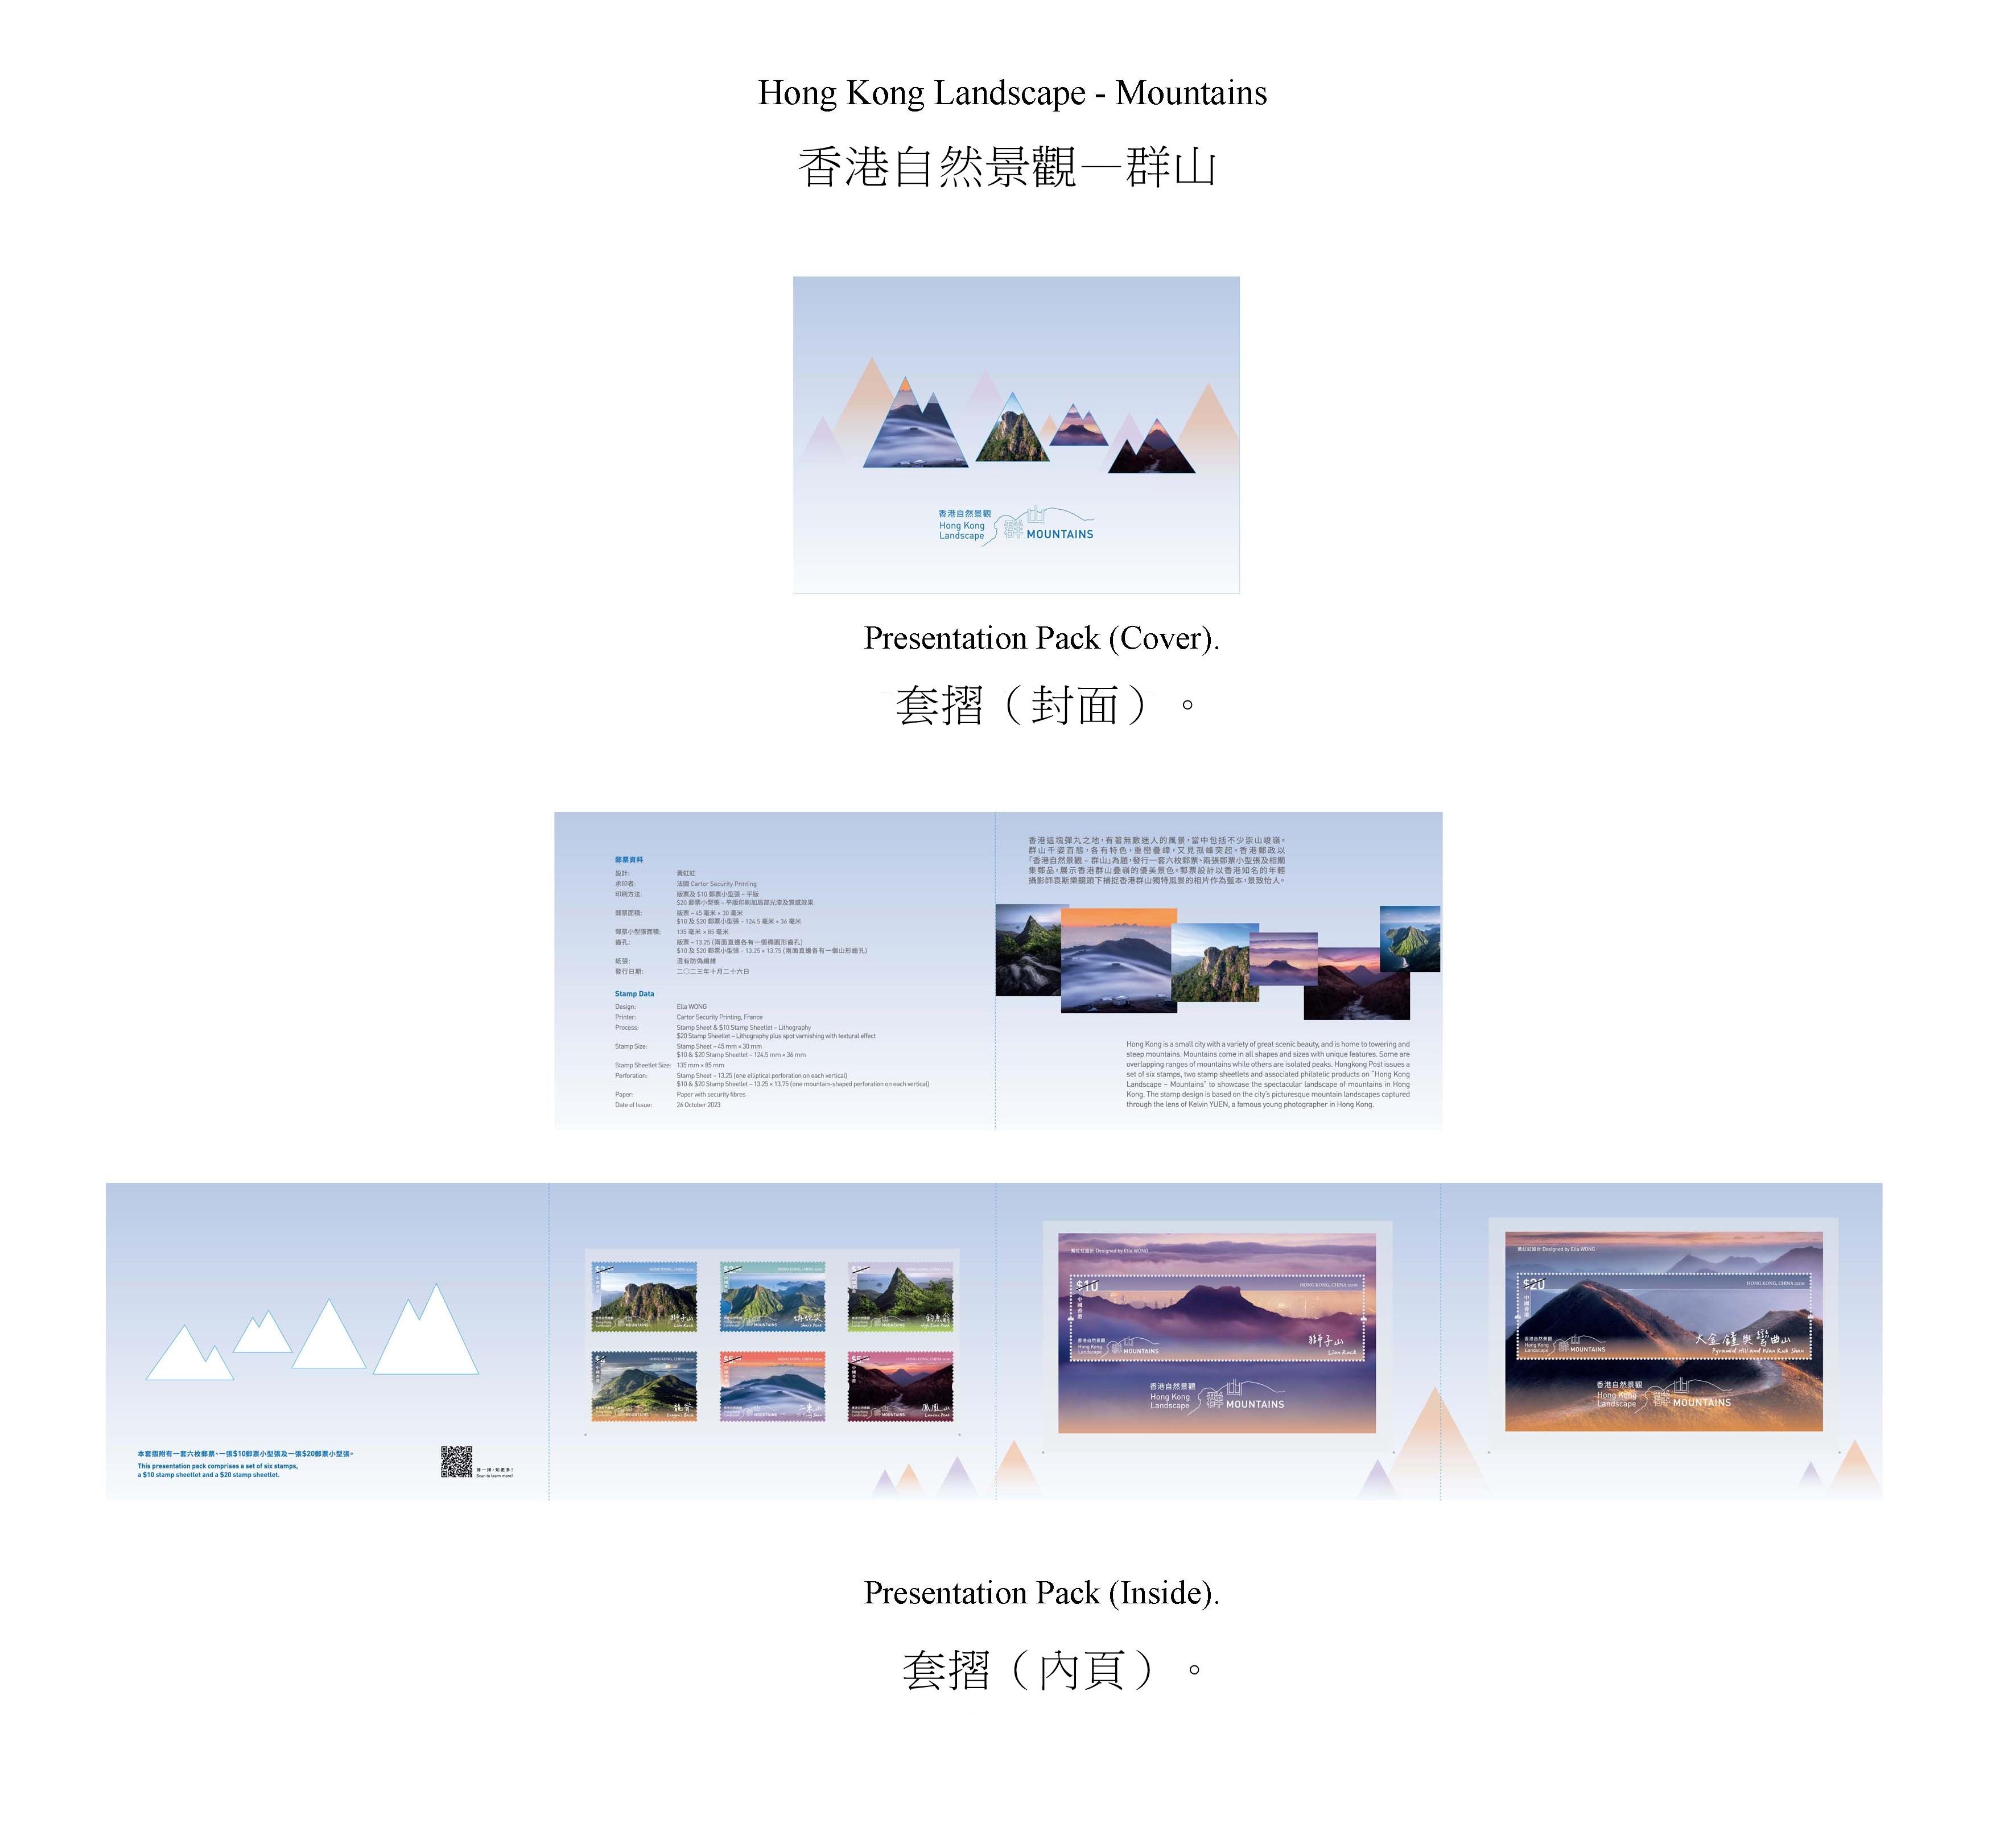 Hongkong Post will launch a special stamp issue and associated philatelic products on the theme of "Hong Kong Landscape - Mountains" on October 26 (Thursday). Photos show the presentation pack.

